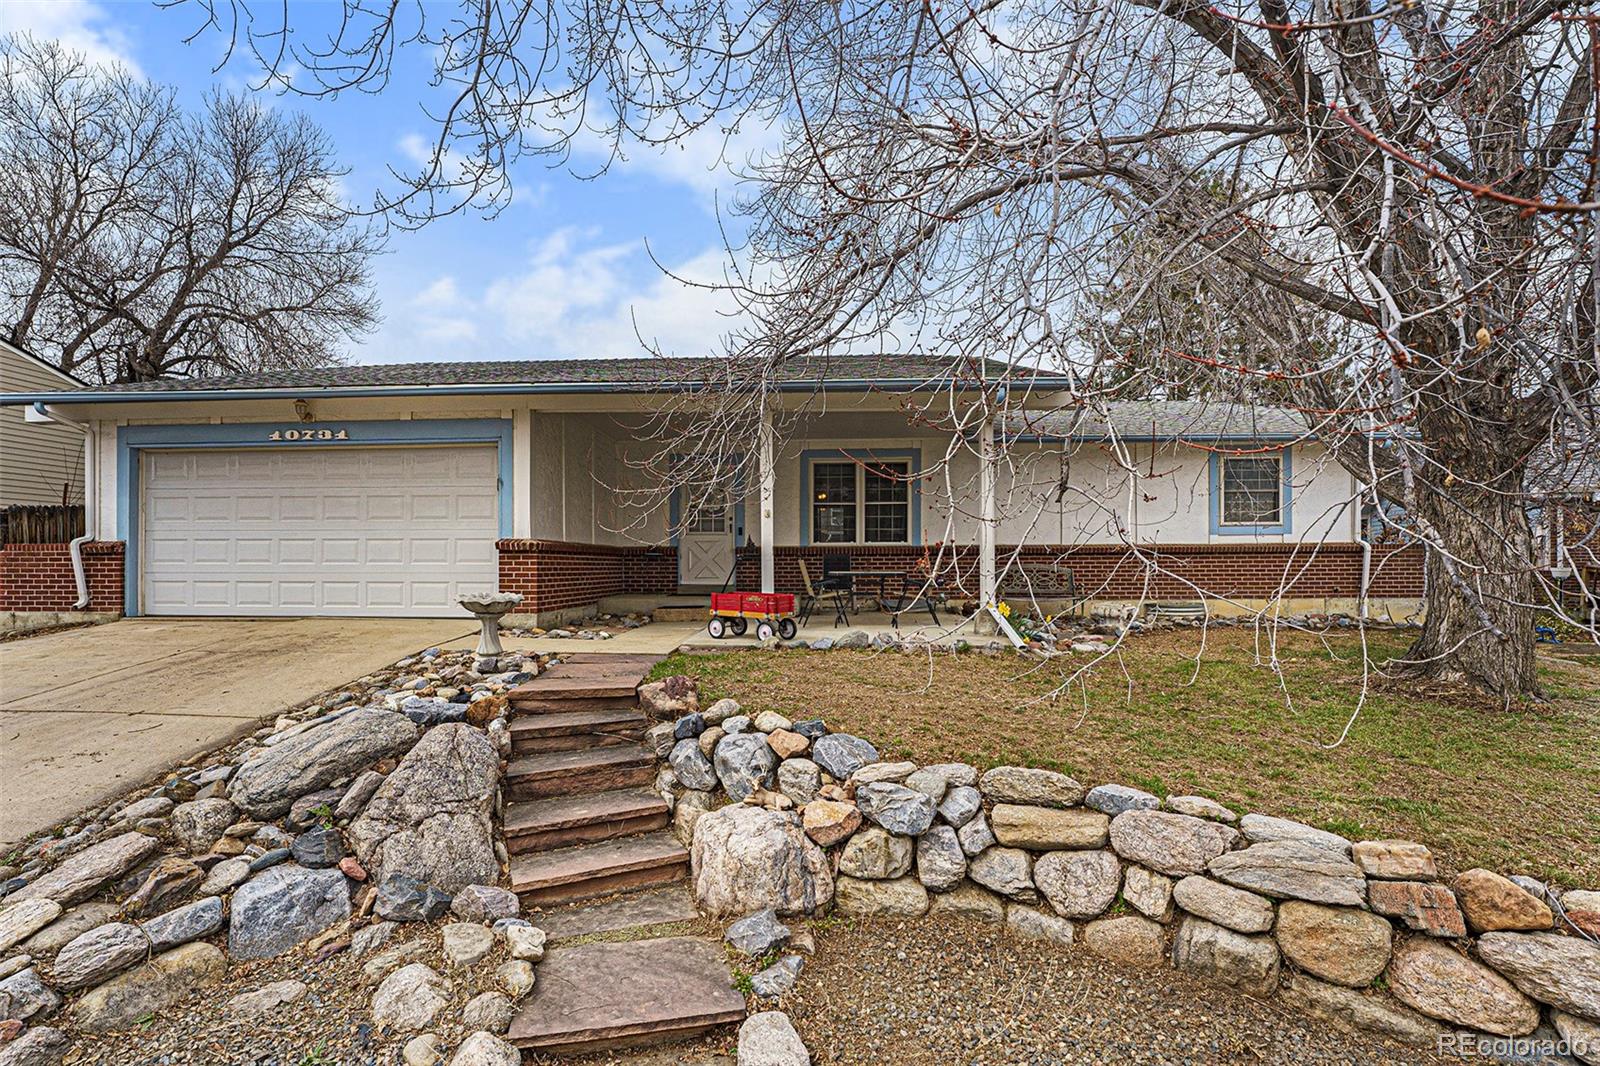 Report Image for 10731 W 102nd Place,Westminster, Colorado